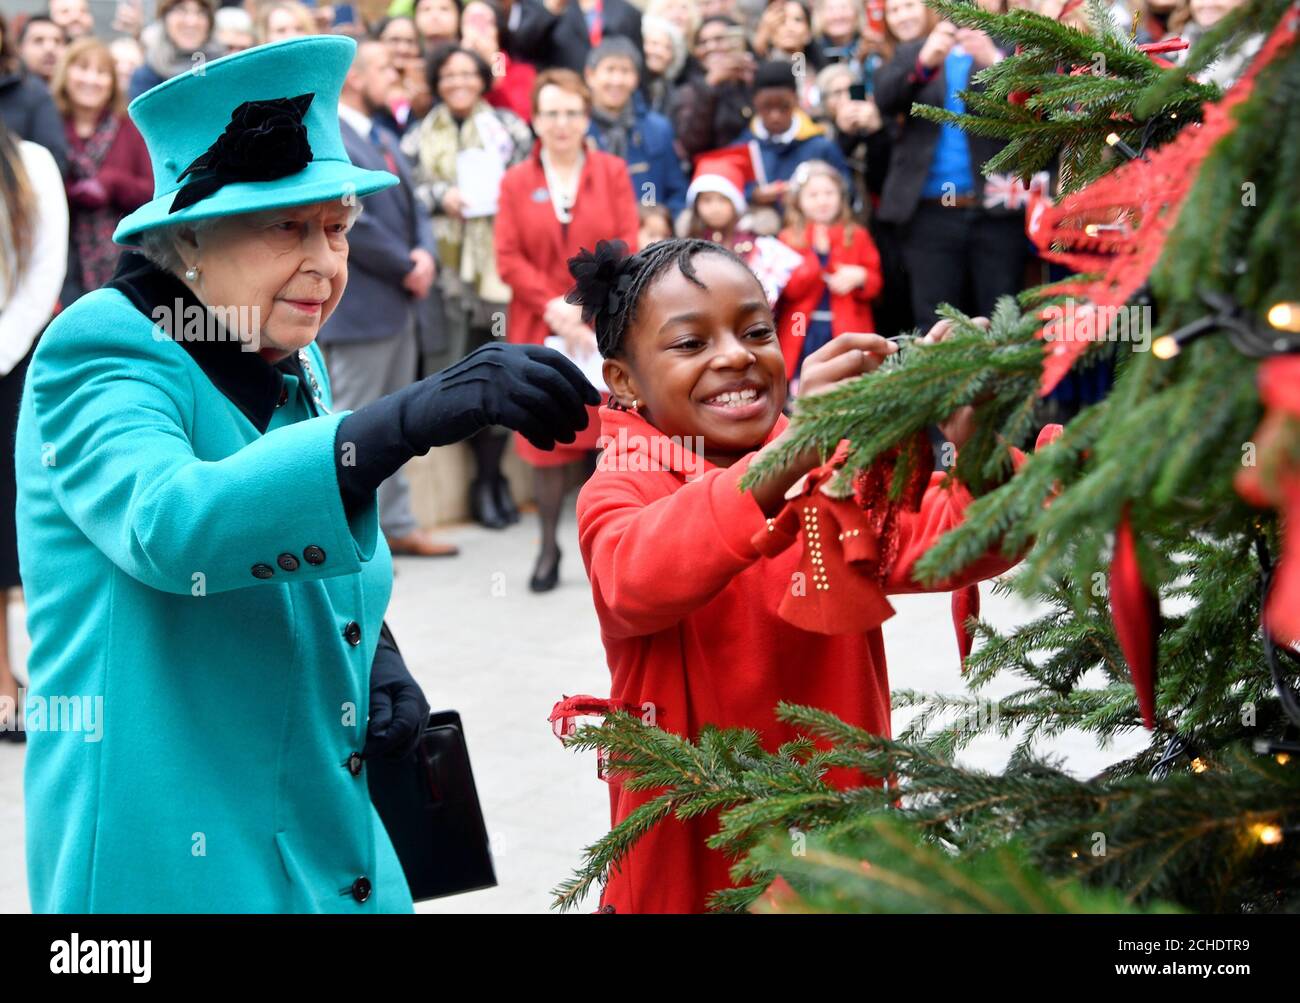 Queen Elizabeth II and Shylah Gordon, aged 8, attach a bauble to a Christmas tree during her visit to Coram, the UK's oldest children's charity, to open the Queen Elizabeth II Centre at its base in central London. Stock Photo